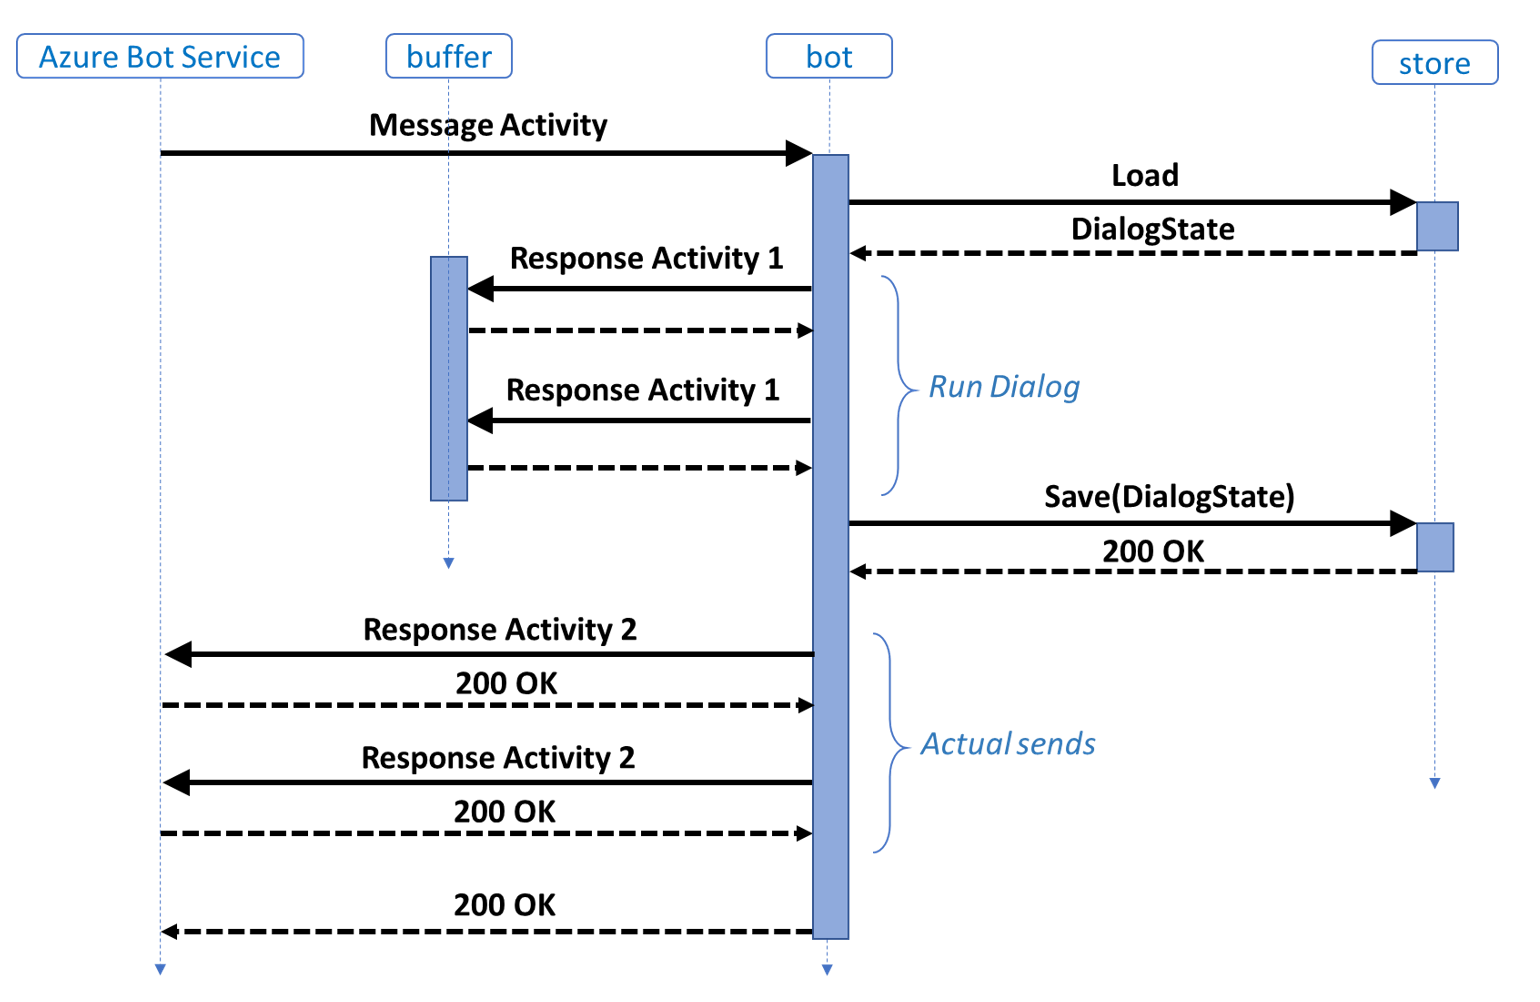 Sequence diagram with messages being sent after dialog state is saved.